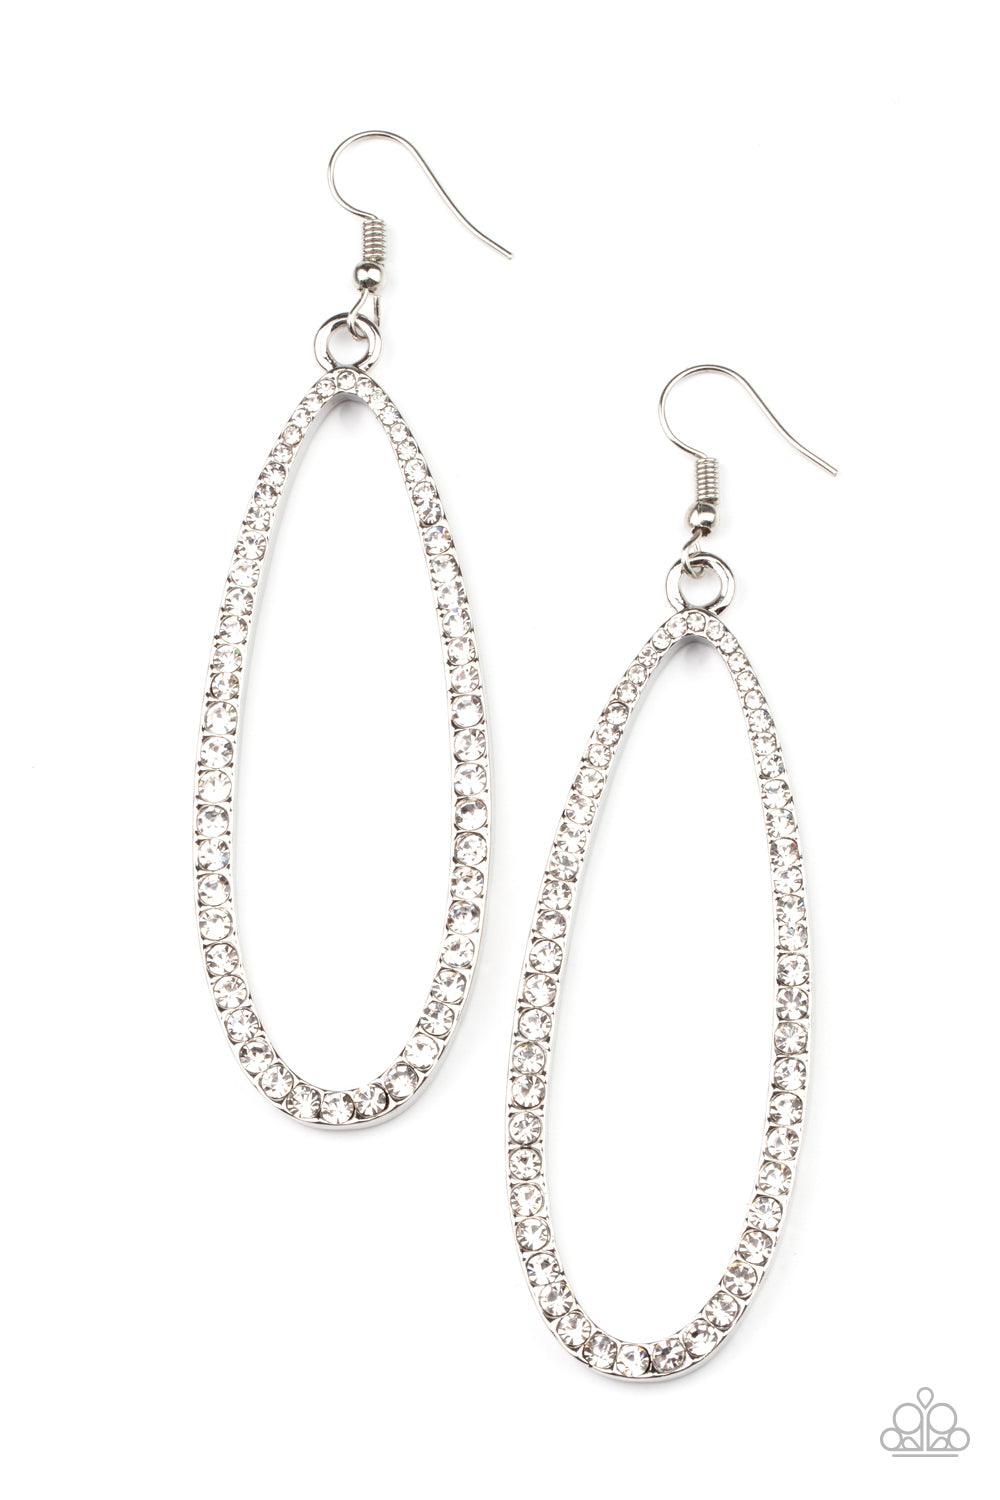 Paparazzi Accessories Dazzling Decorum - White The front of a lengthened silver oval frame is encrusted in glittery white rhinestones, creating a glamorous centerpiece. Earring attaches to a standard fishhook fitting. Sold as one pair of earrings. Jewelry